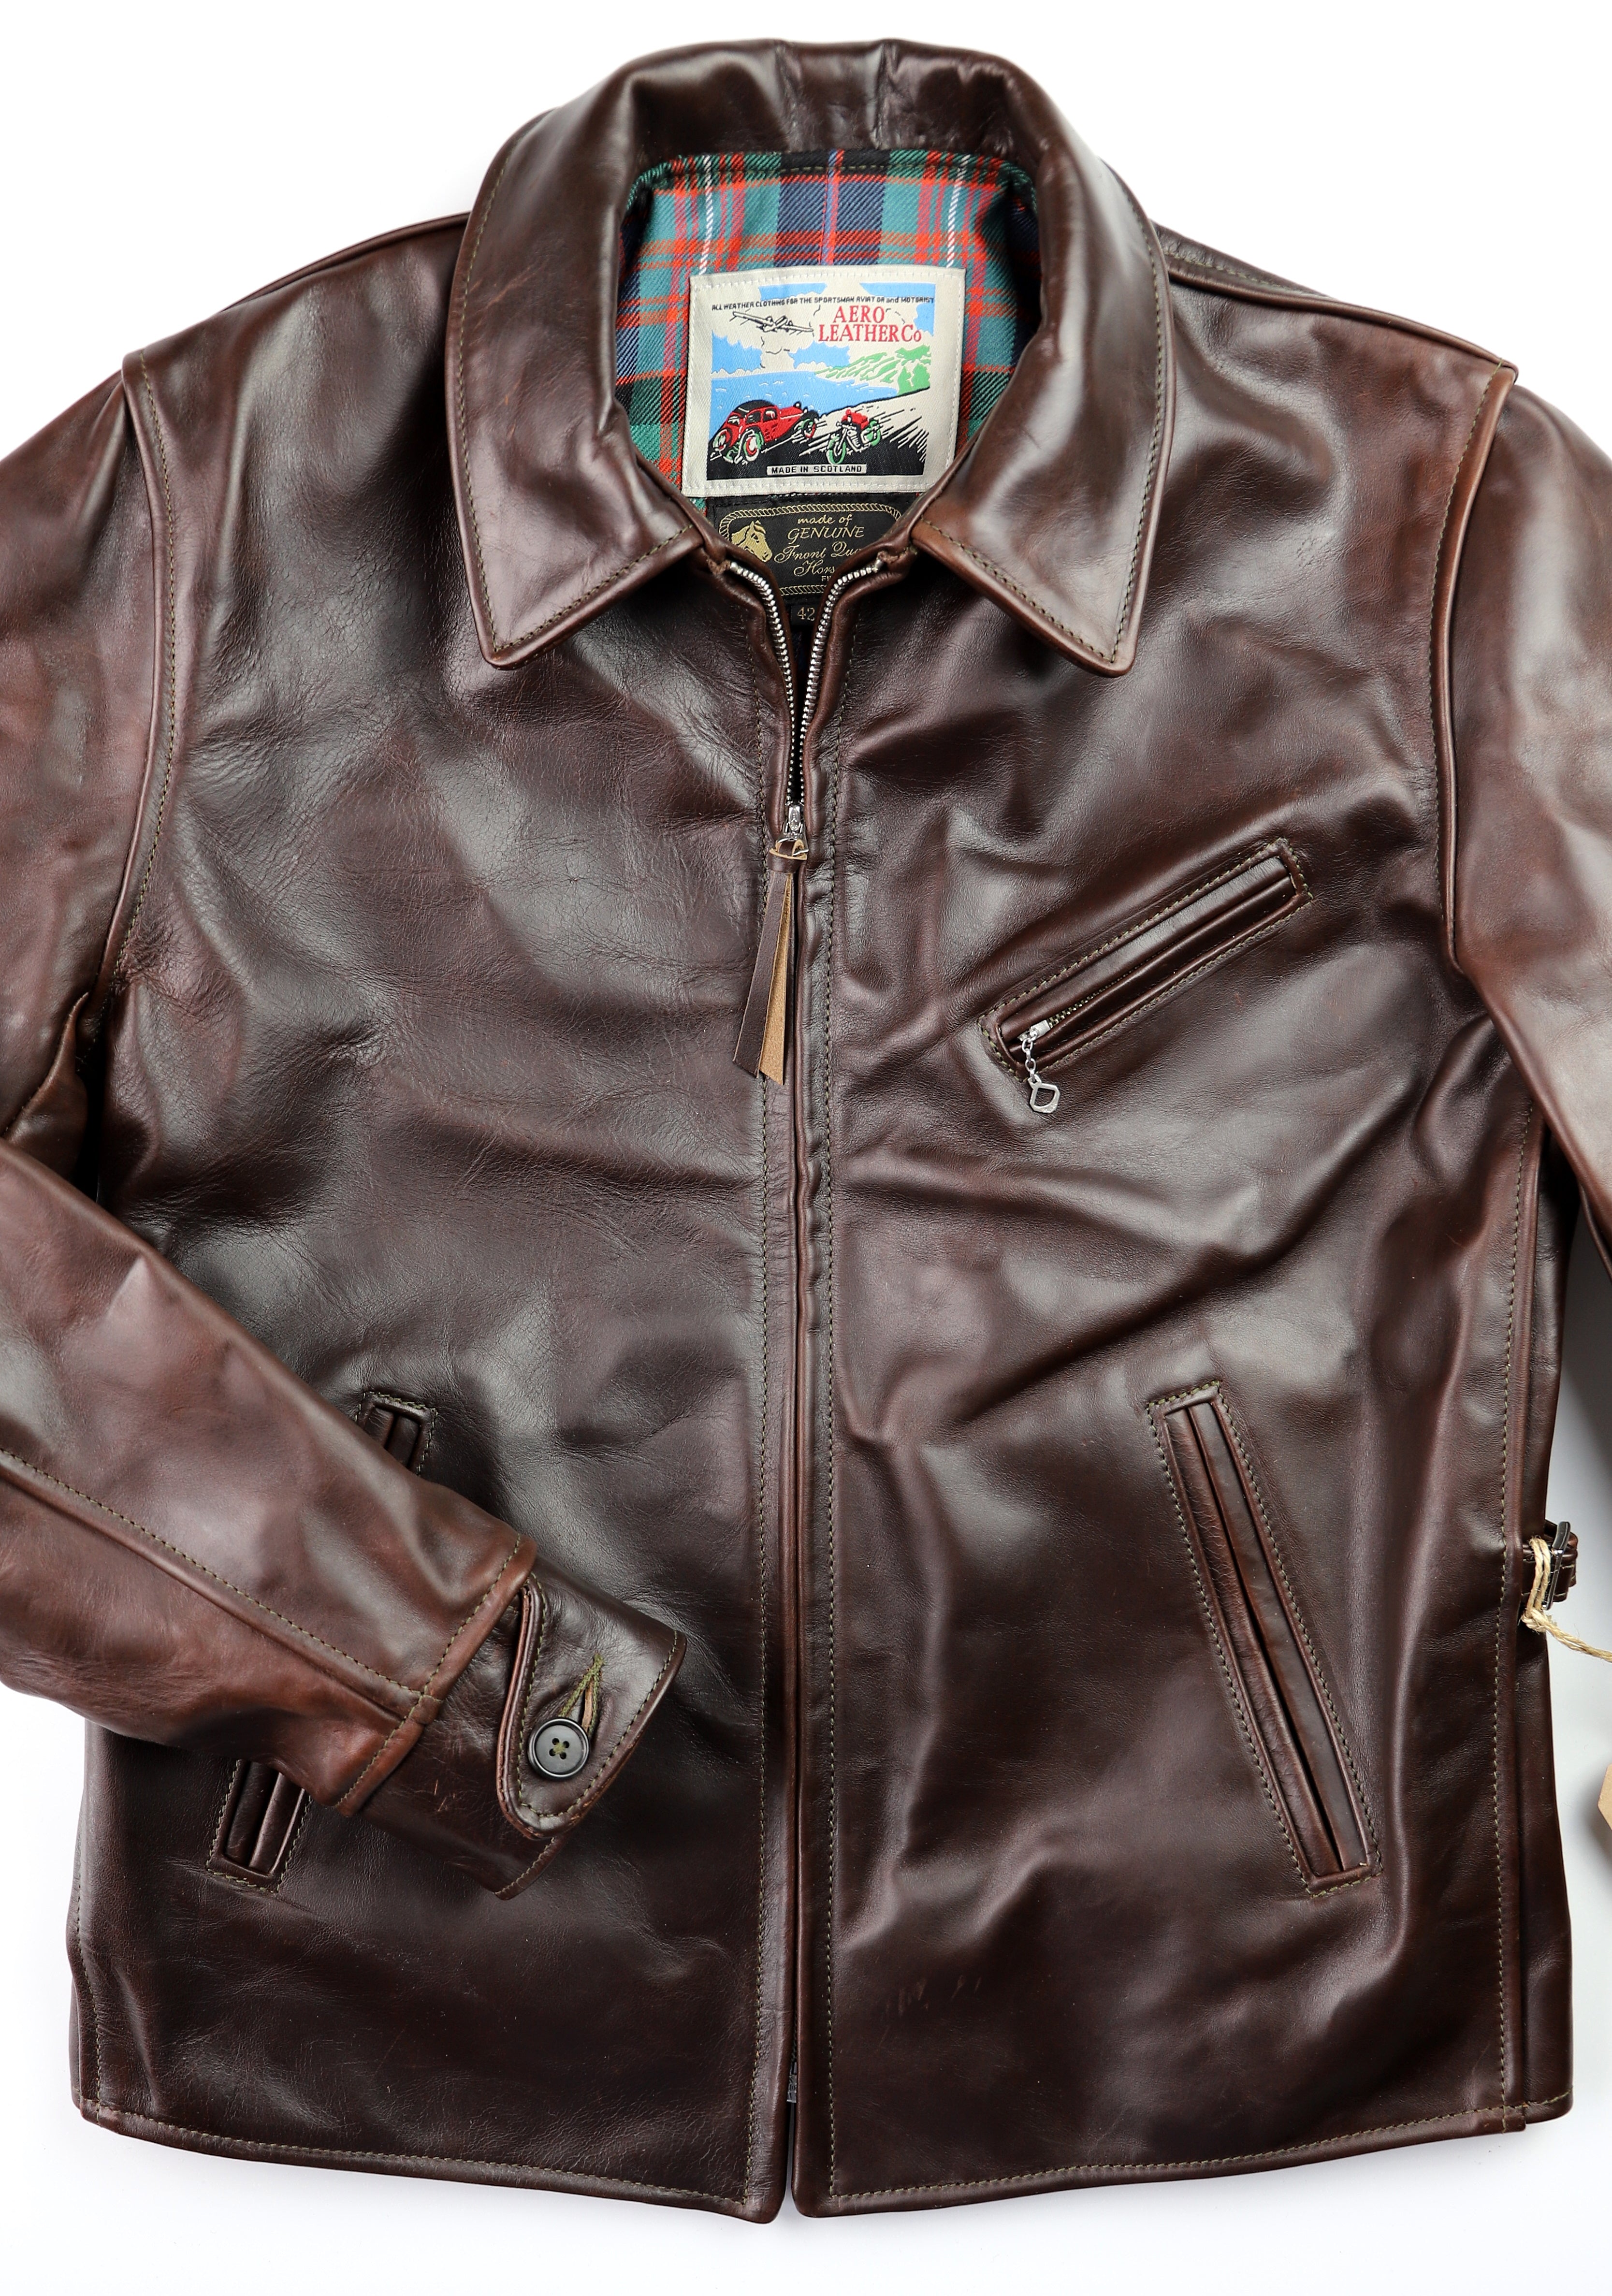 Brown leather jacket with straight front zipper, shirt collar and button sleeves.